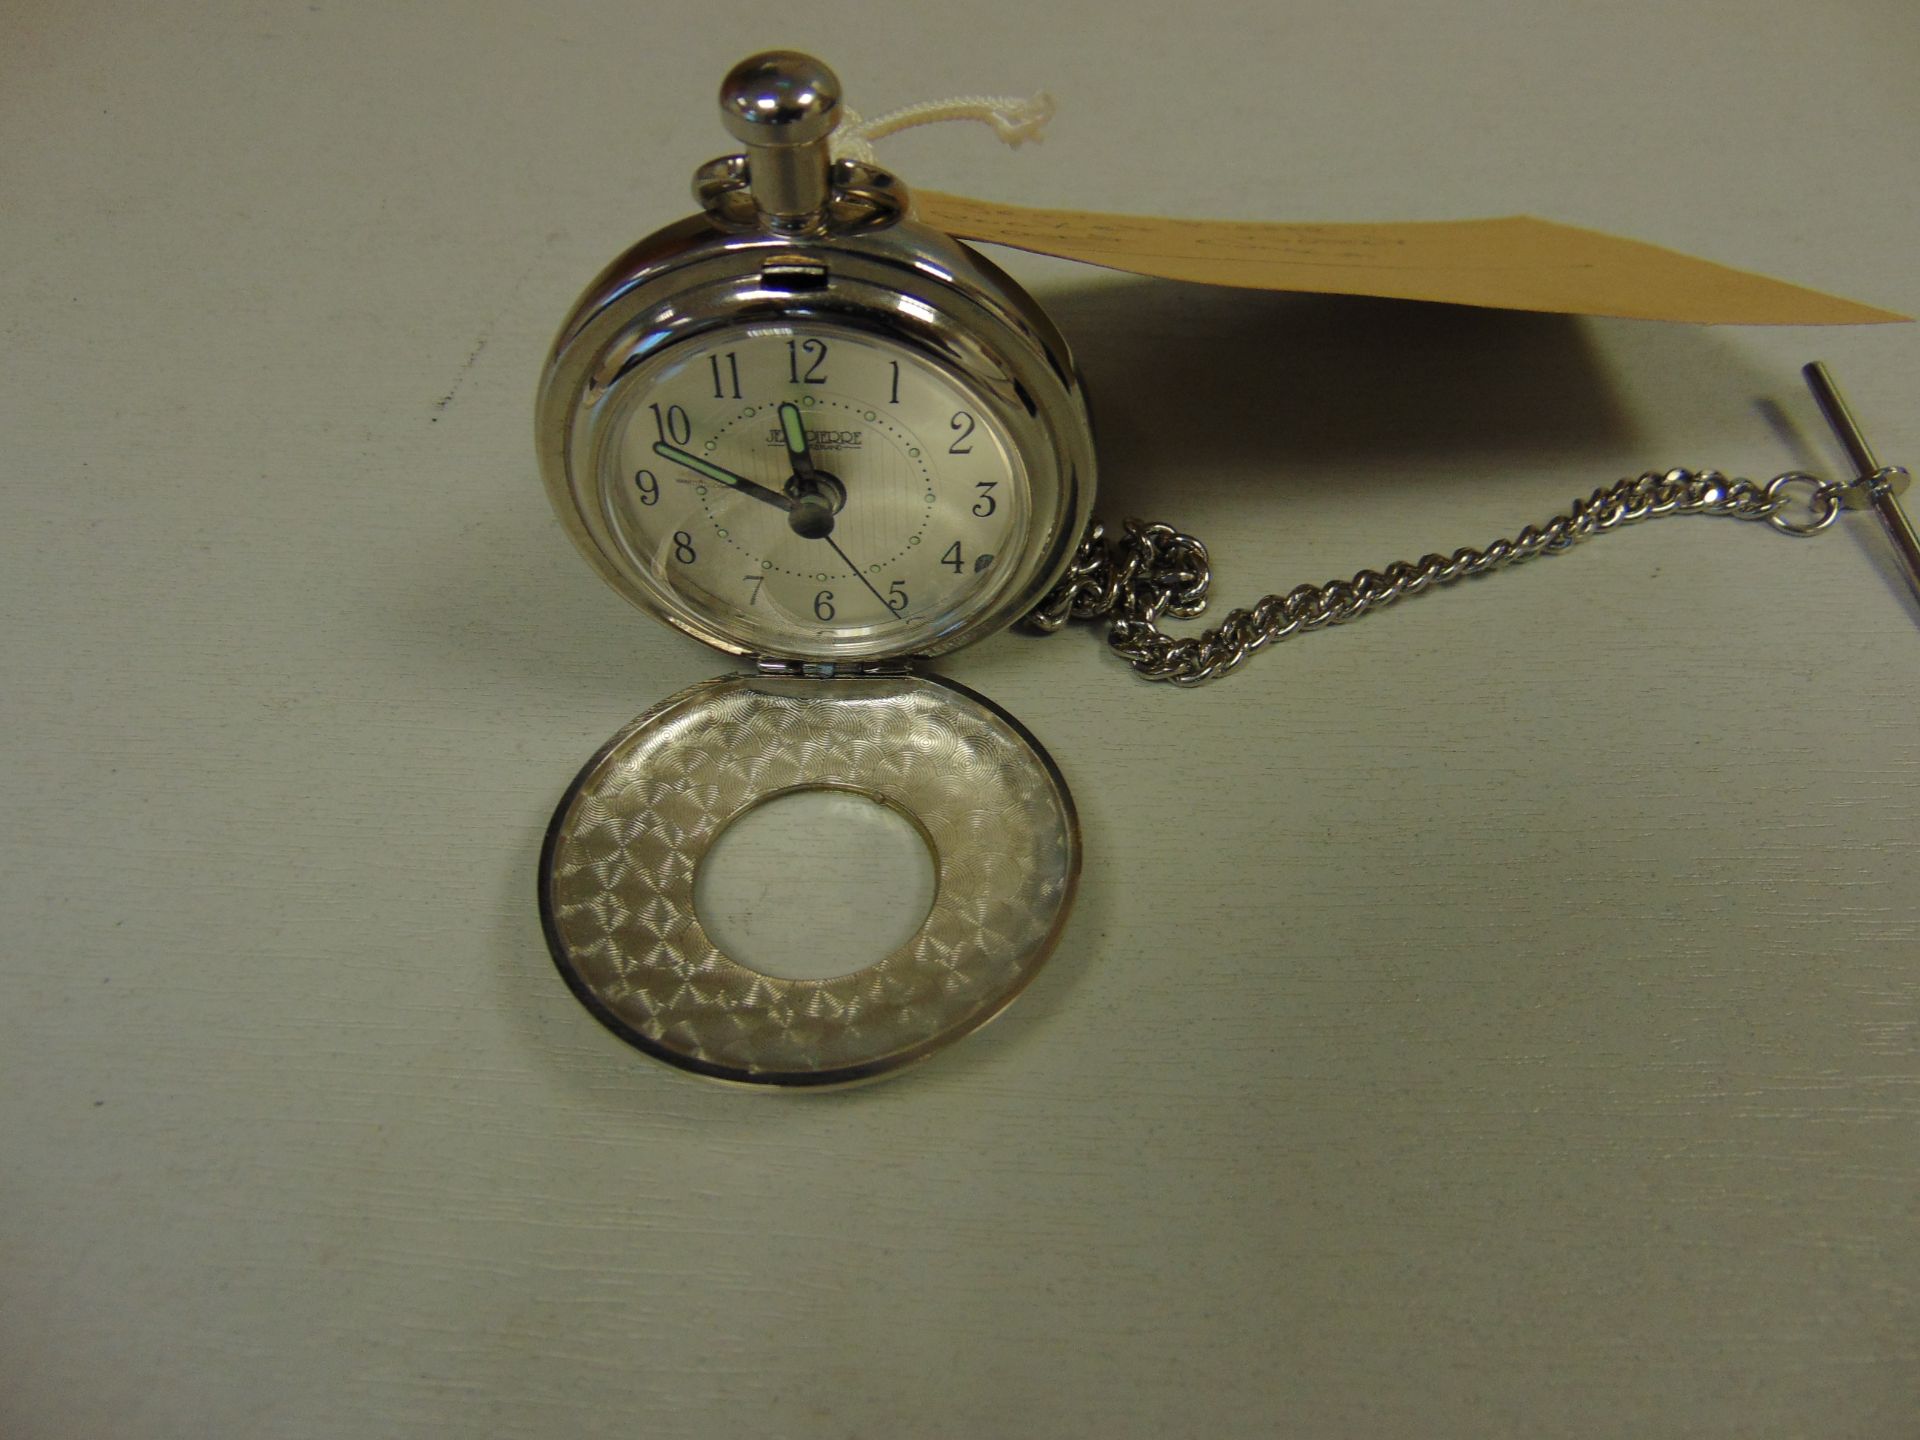 Jean Pierre Pocket Watch and Chain - Image 2 of 4